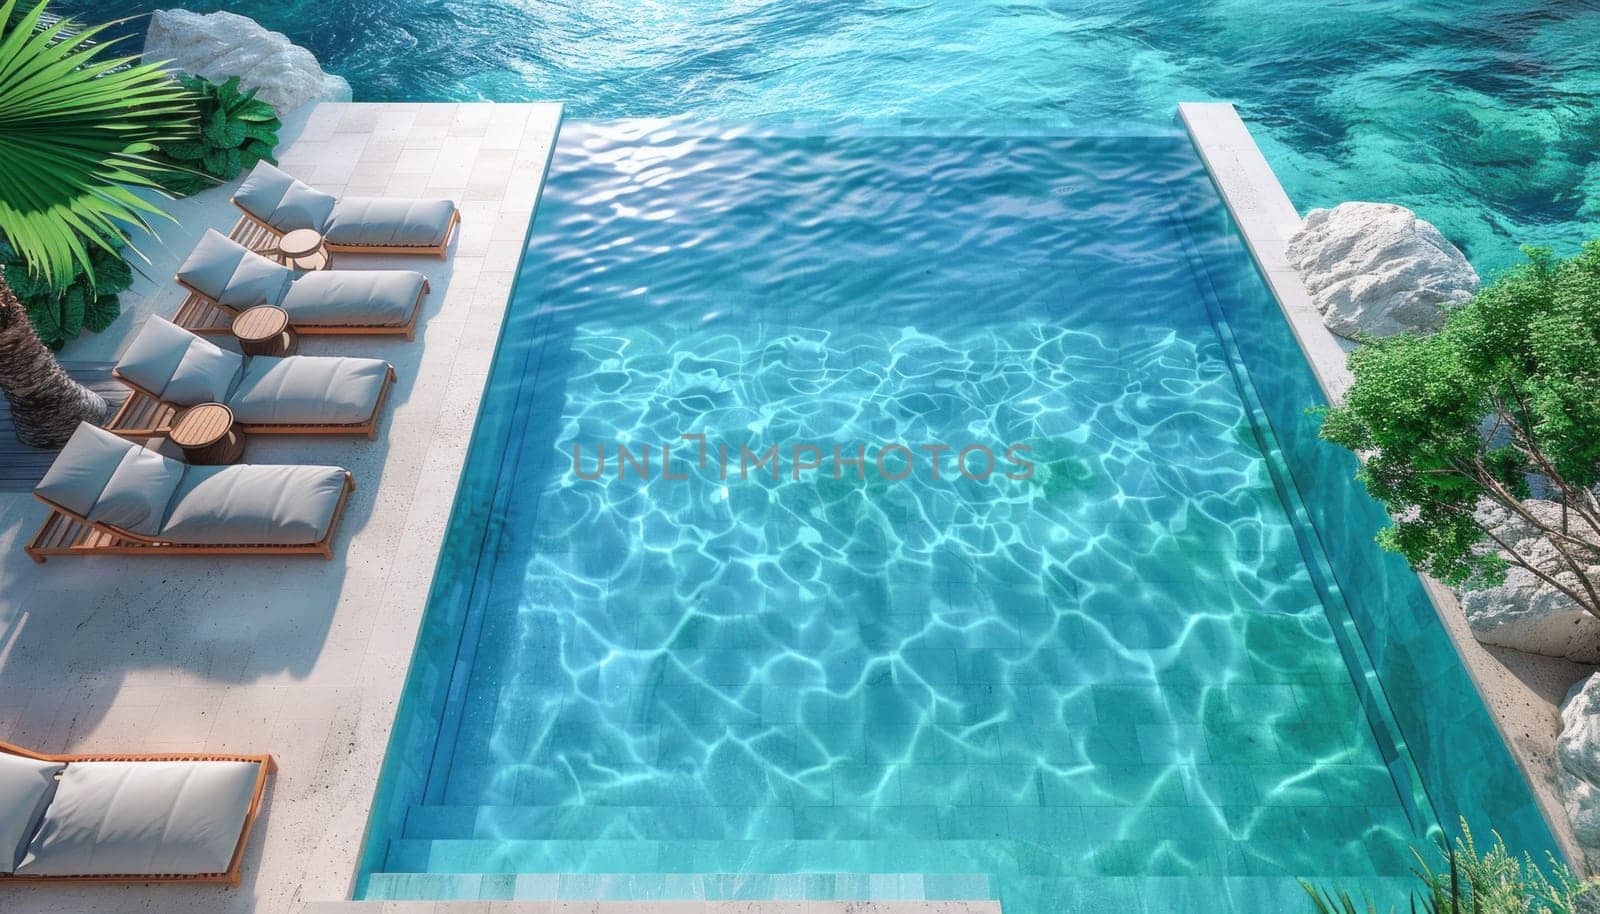 A large swimming pool by the ocean is perfect for relaxation and can increase the propertys value significantly